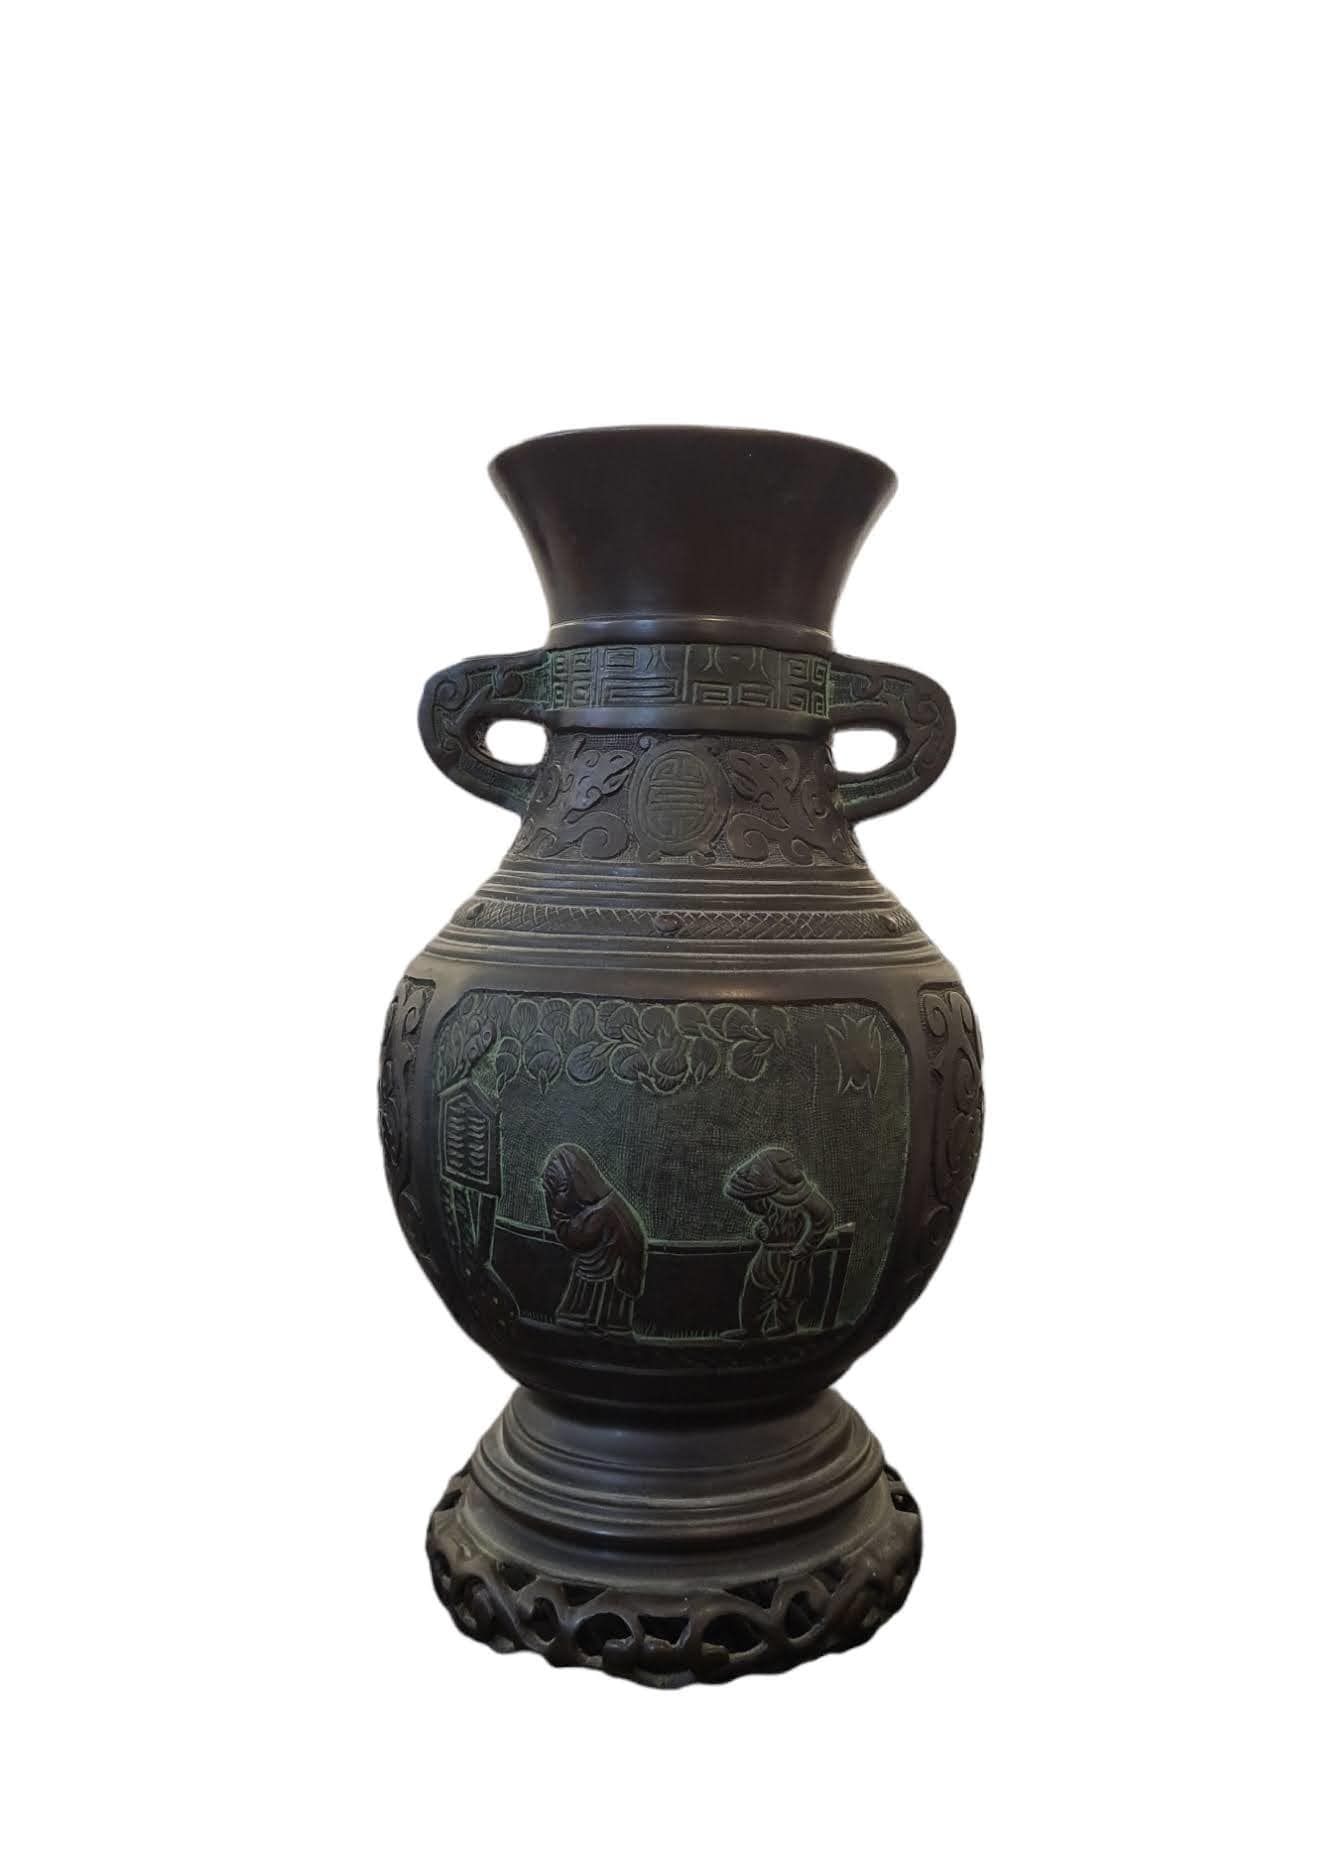 Null JAPAN, 20th century

A balistre-shaped vase in bronze with a medal patina a&hellip;